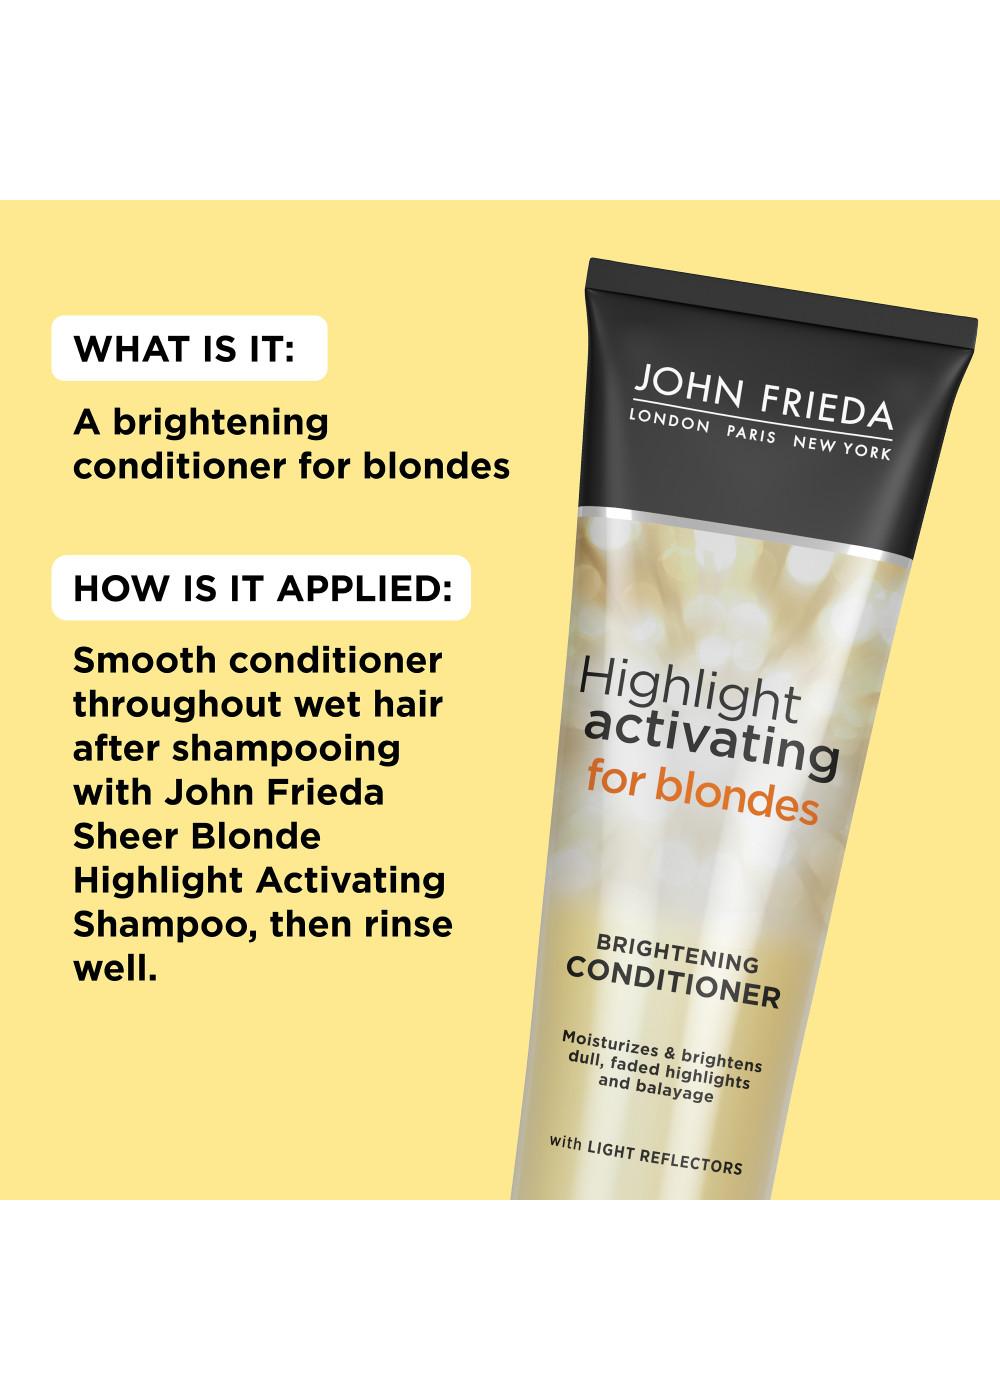 John Frieda Highlight Activating for Blondes Brightening Conditioner; image 3 of 7